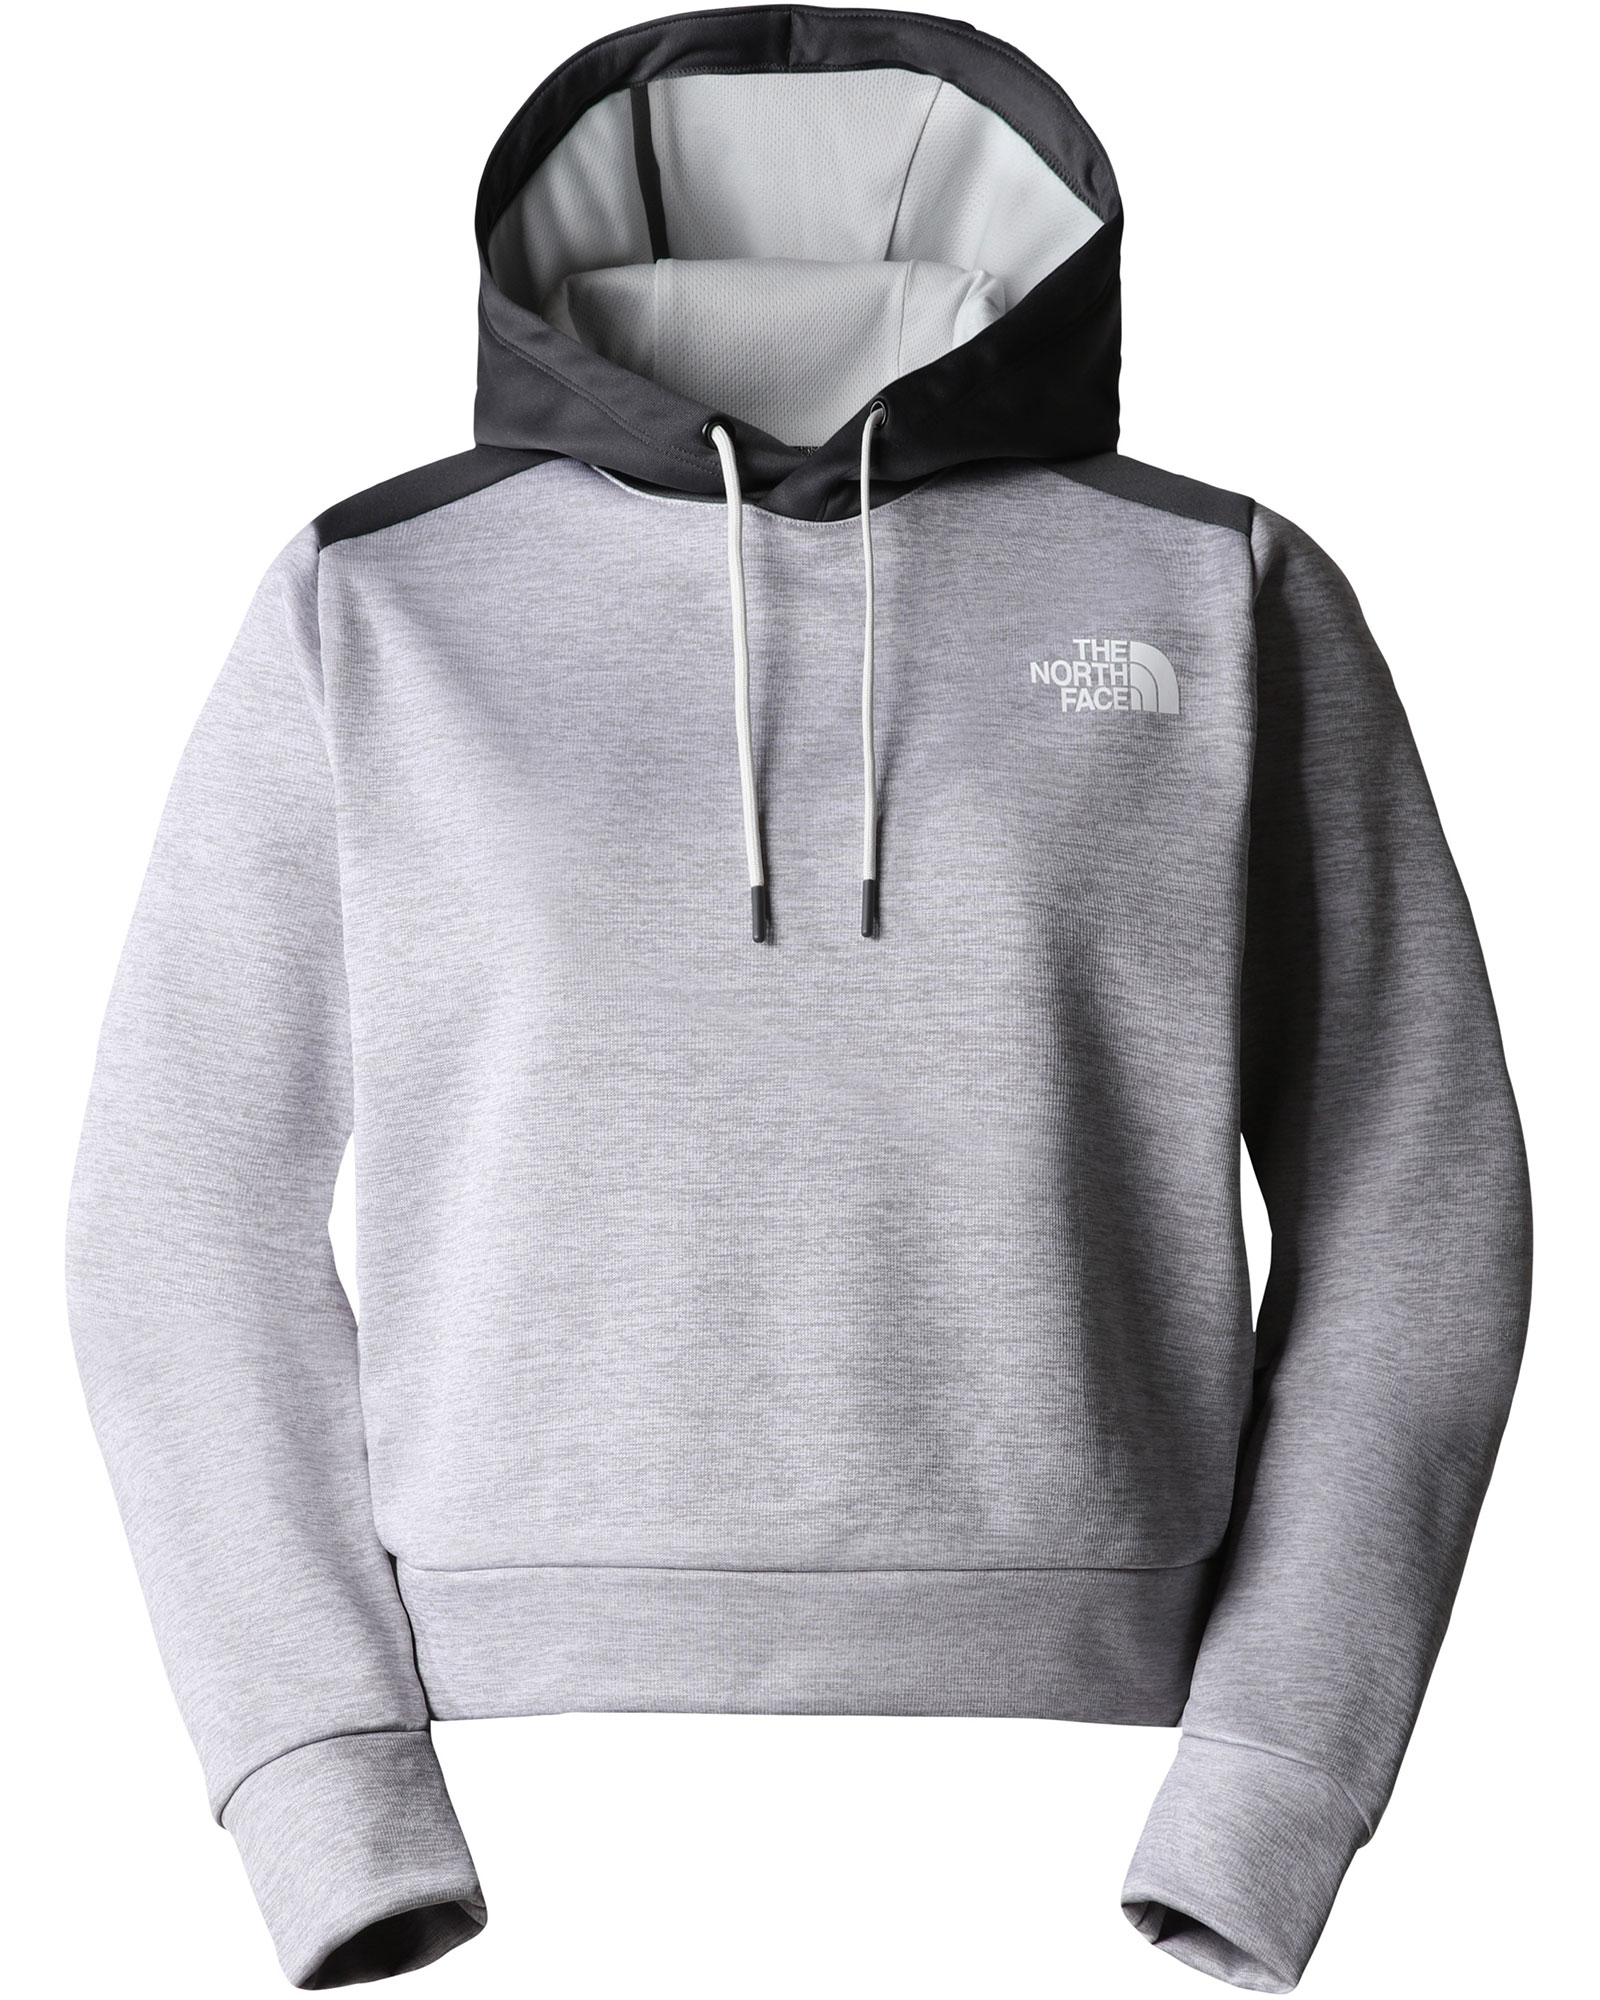 The North Face Reaxion Women’s Fleece Pullover Hoodie - TNF Light Grey Heather M